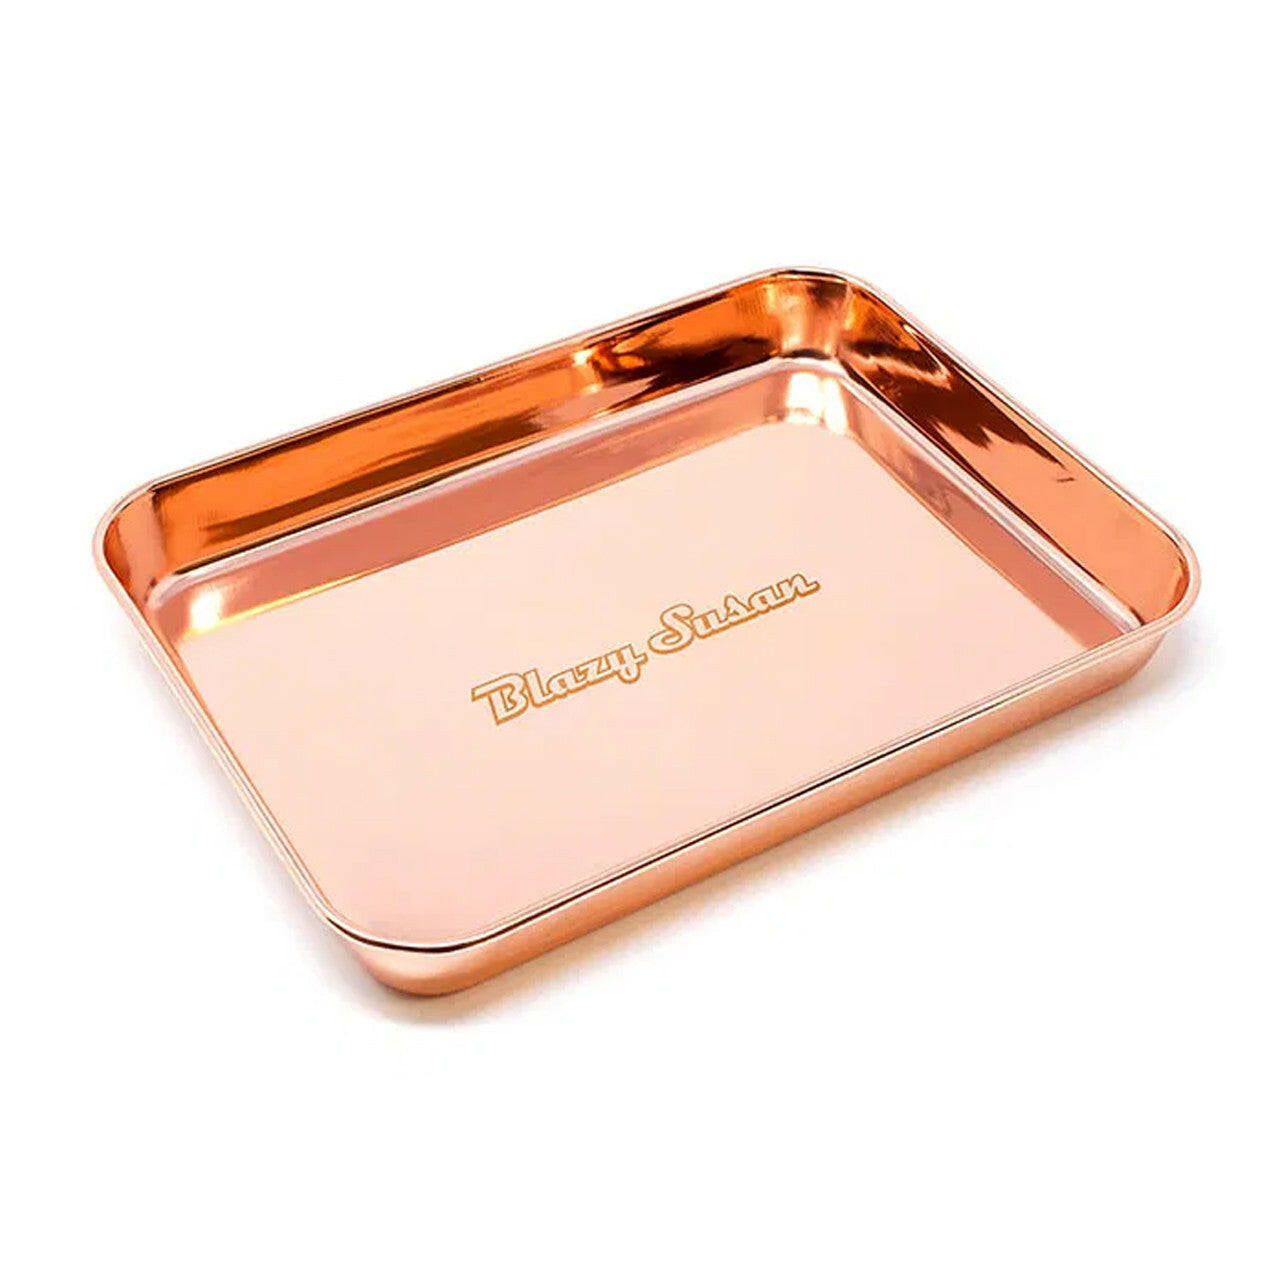 Blazy Susan Stainless Steel Rolling Tray - Rose Gold 